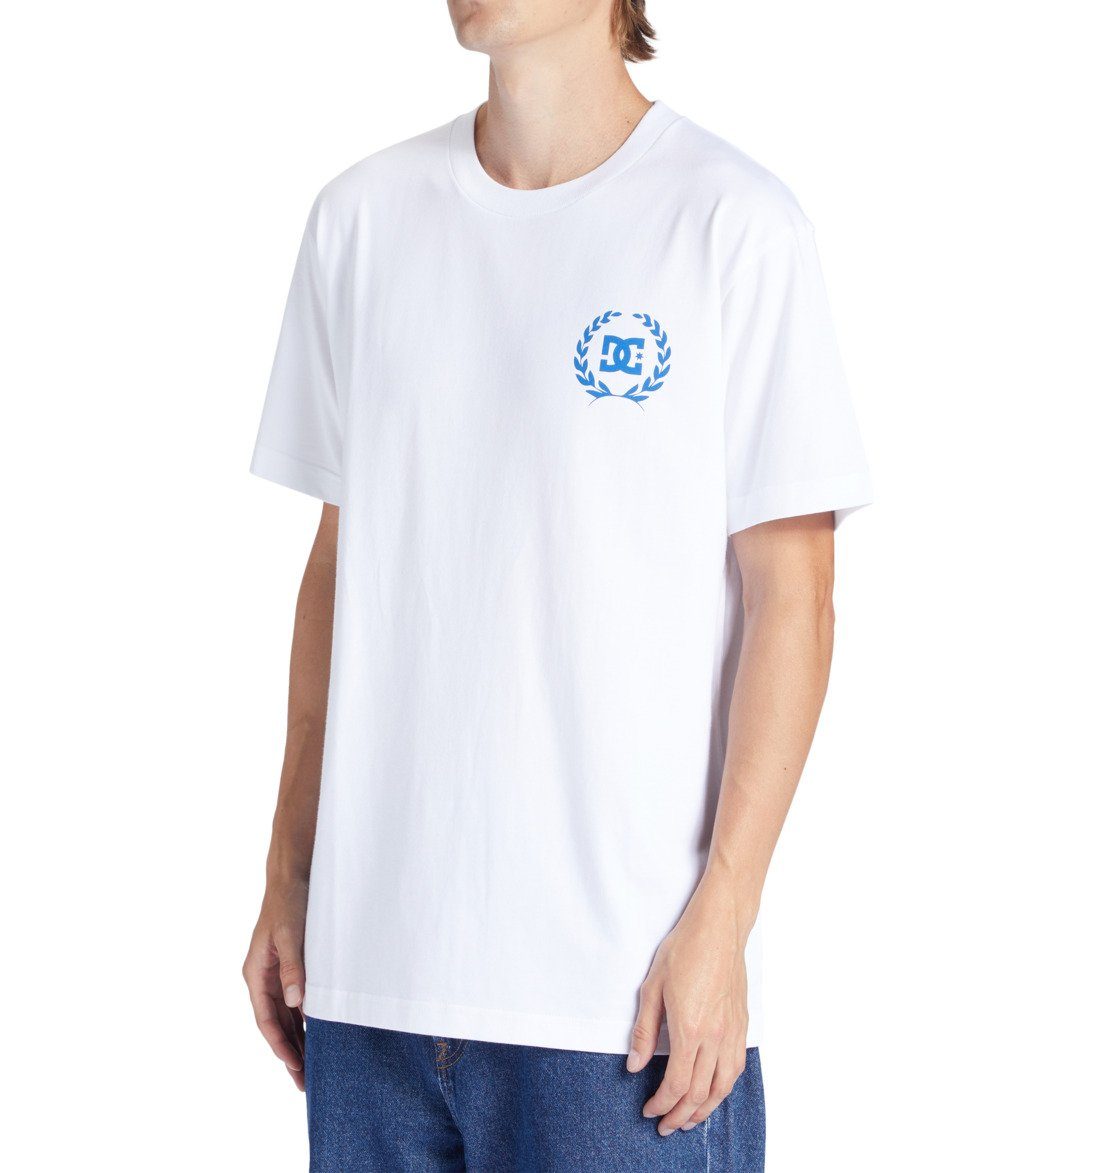 Lifes Changing White T-Shirt DC Shoes